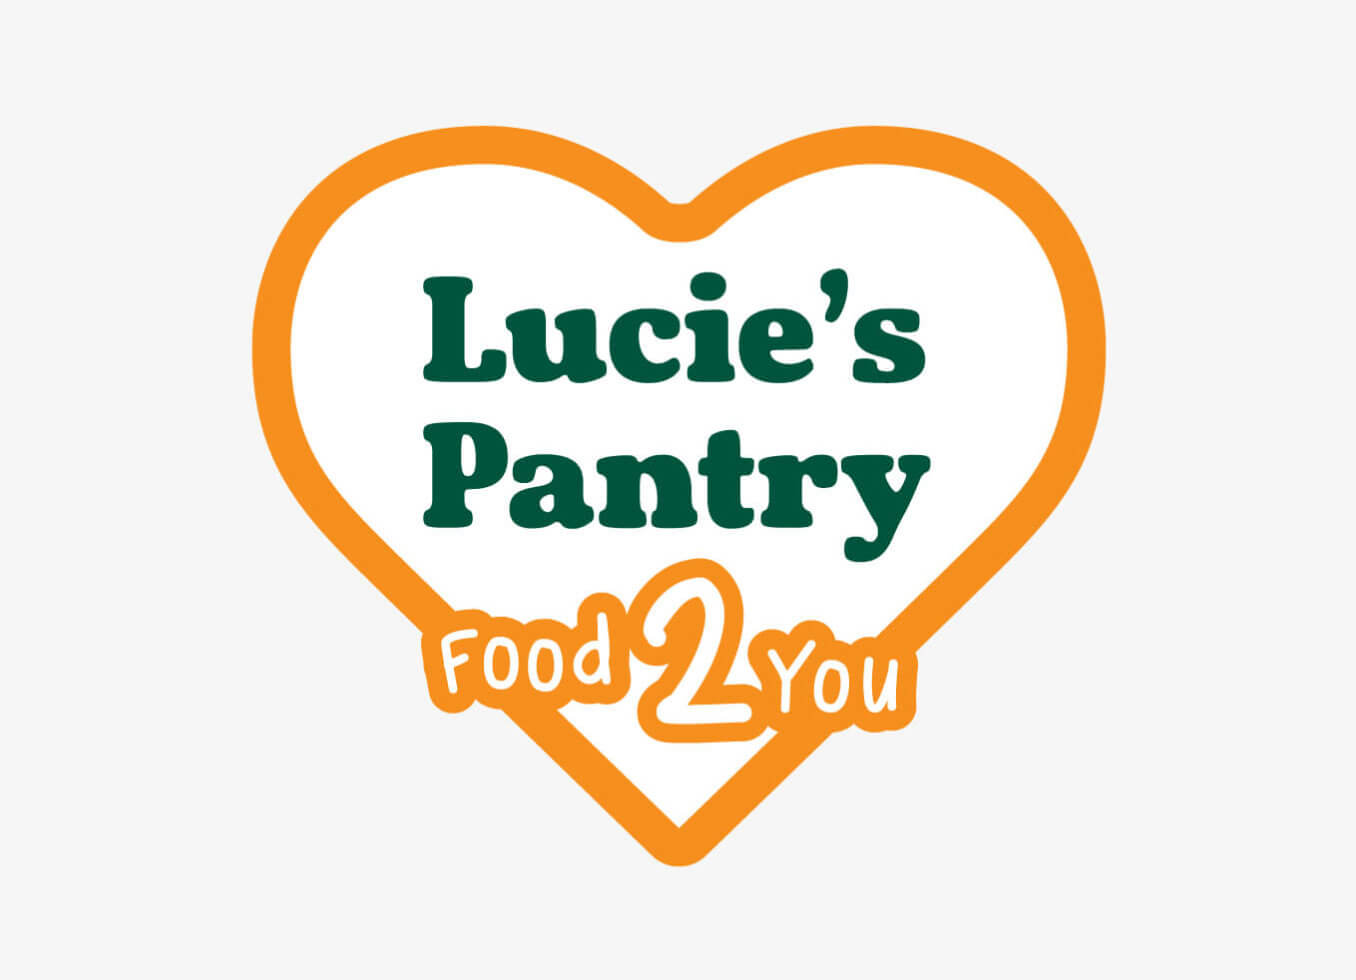 Lucie's Pantry Food2You